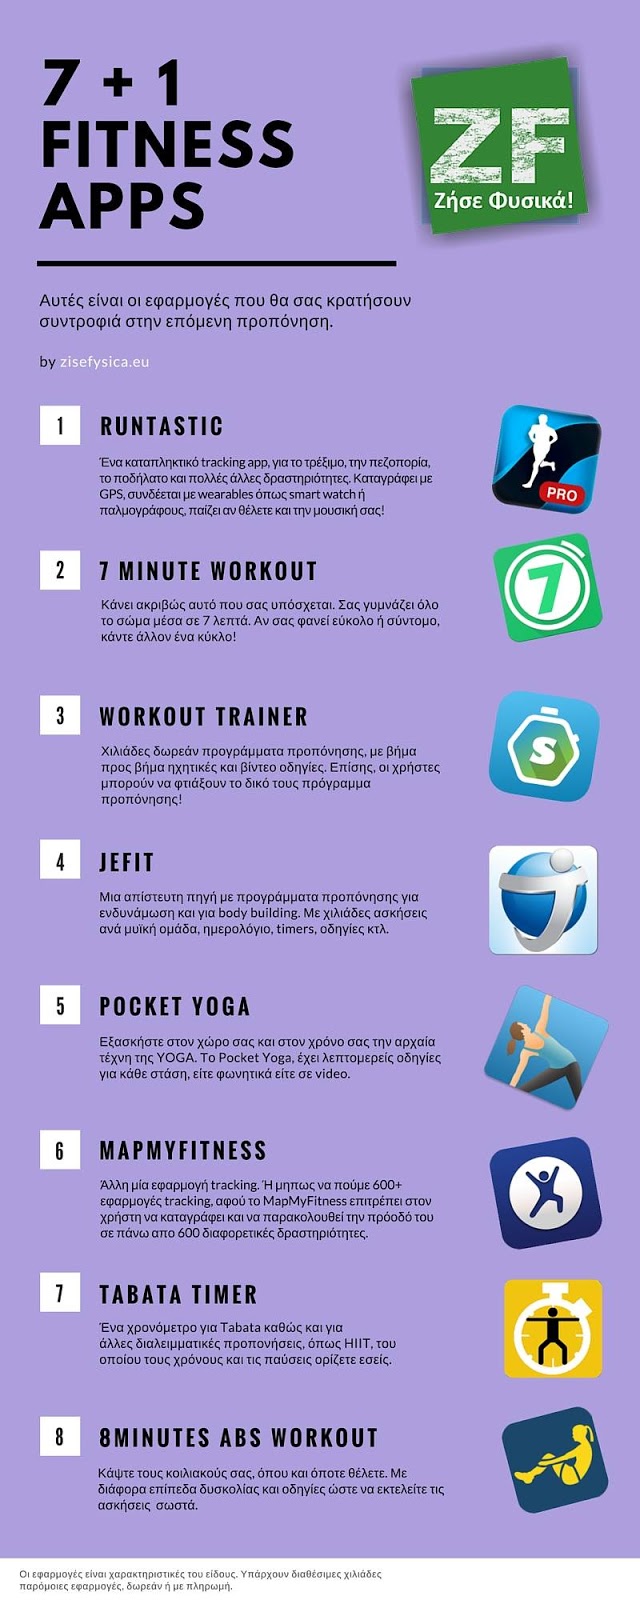 7+1 fitness apps